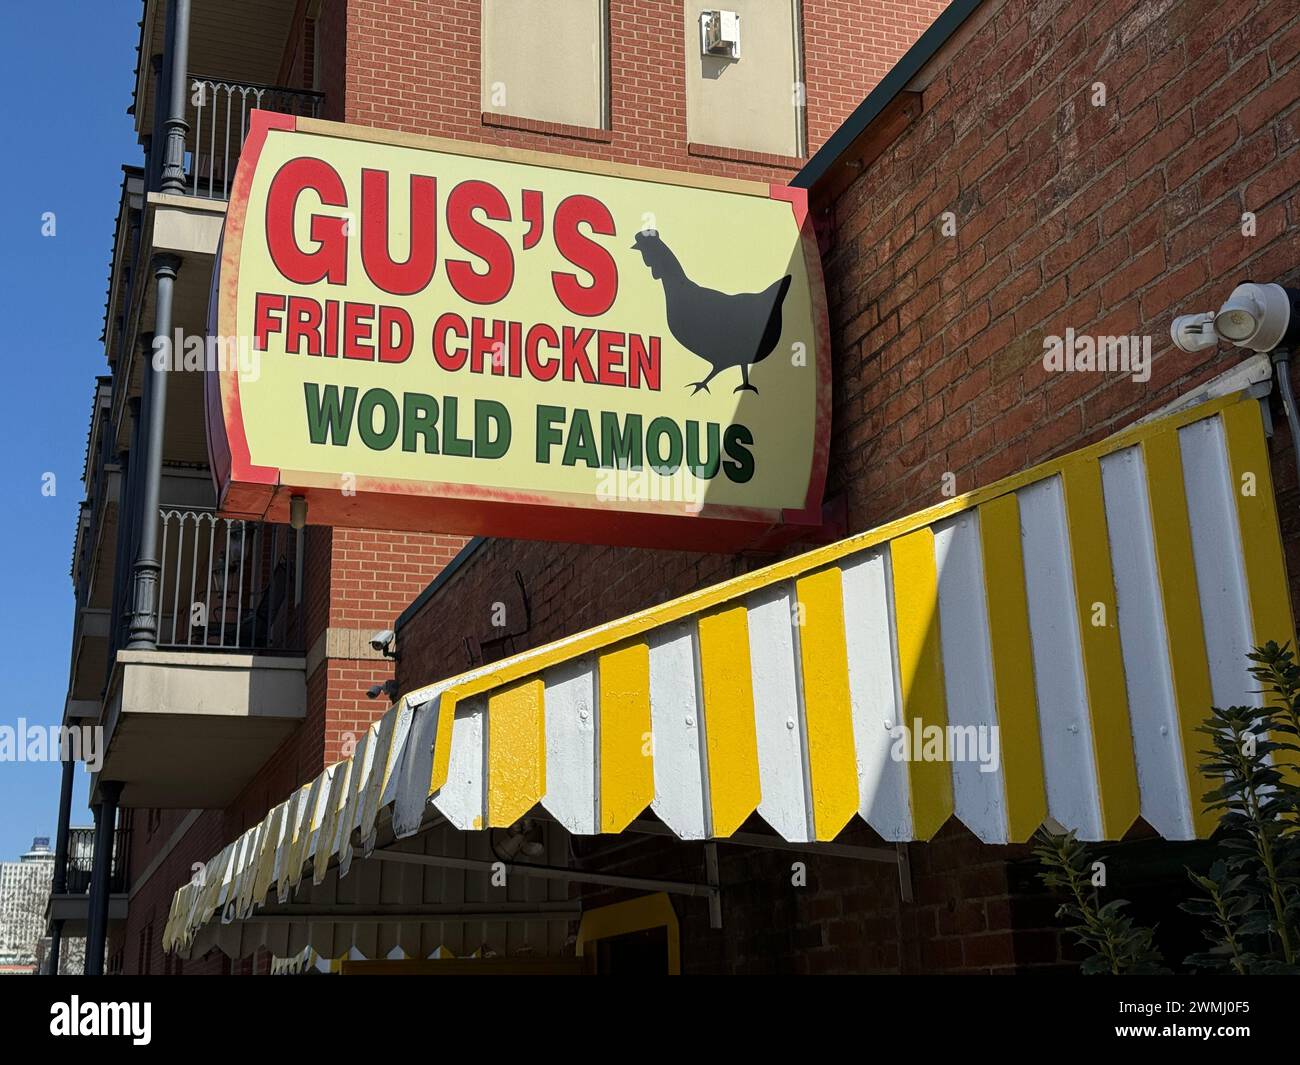 Gus's World Famous Fried Chicken in Memphis Tennessee Stockfoto